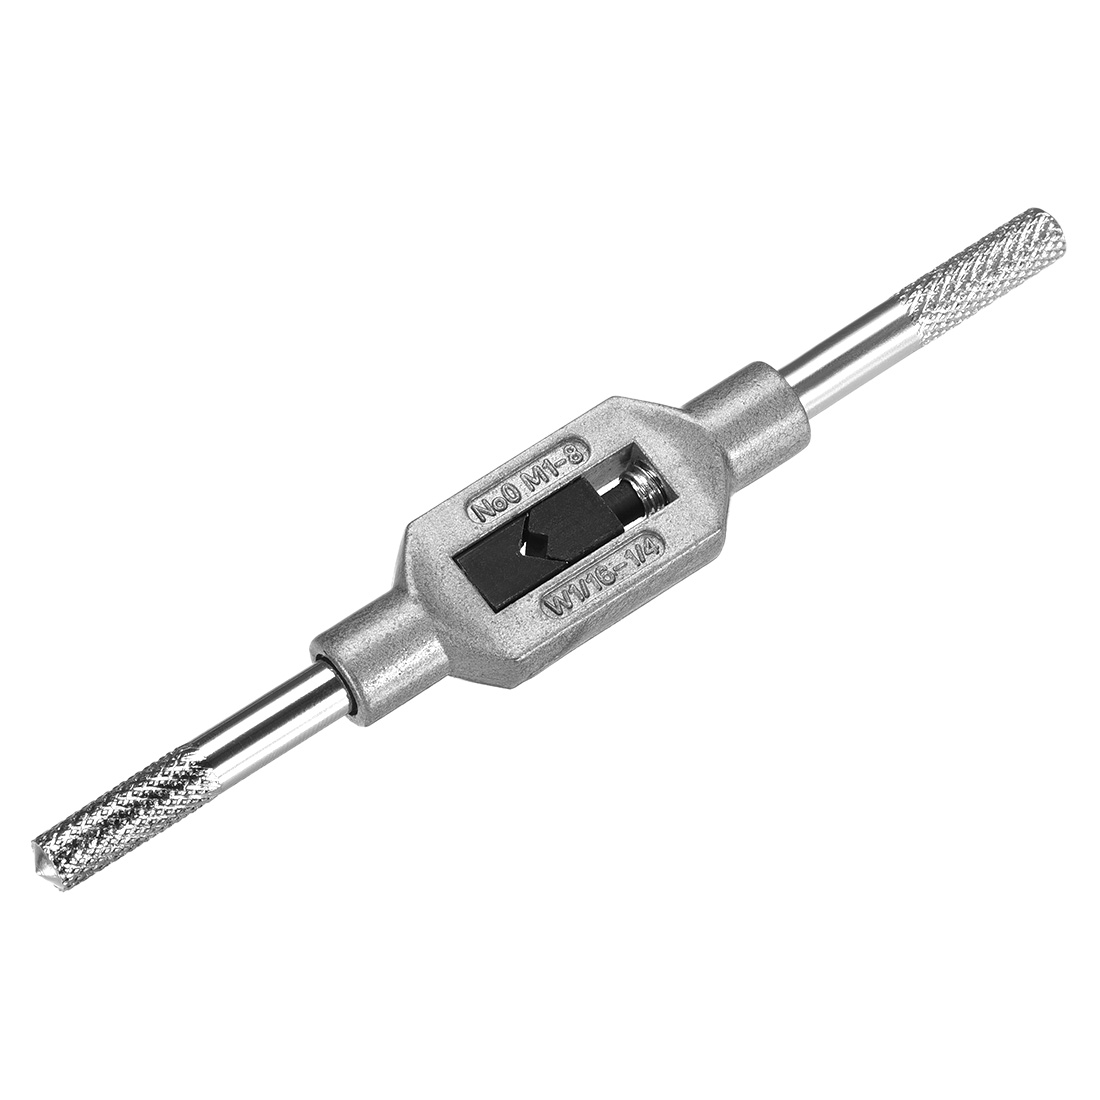 Uxcell Metric M1-M8 1/16" - 1/4" (UNC/UNF) Adjustable Tap Wrench Handle Nickel Plated 2 Pack - image 4 of 6